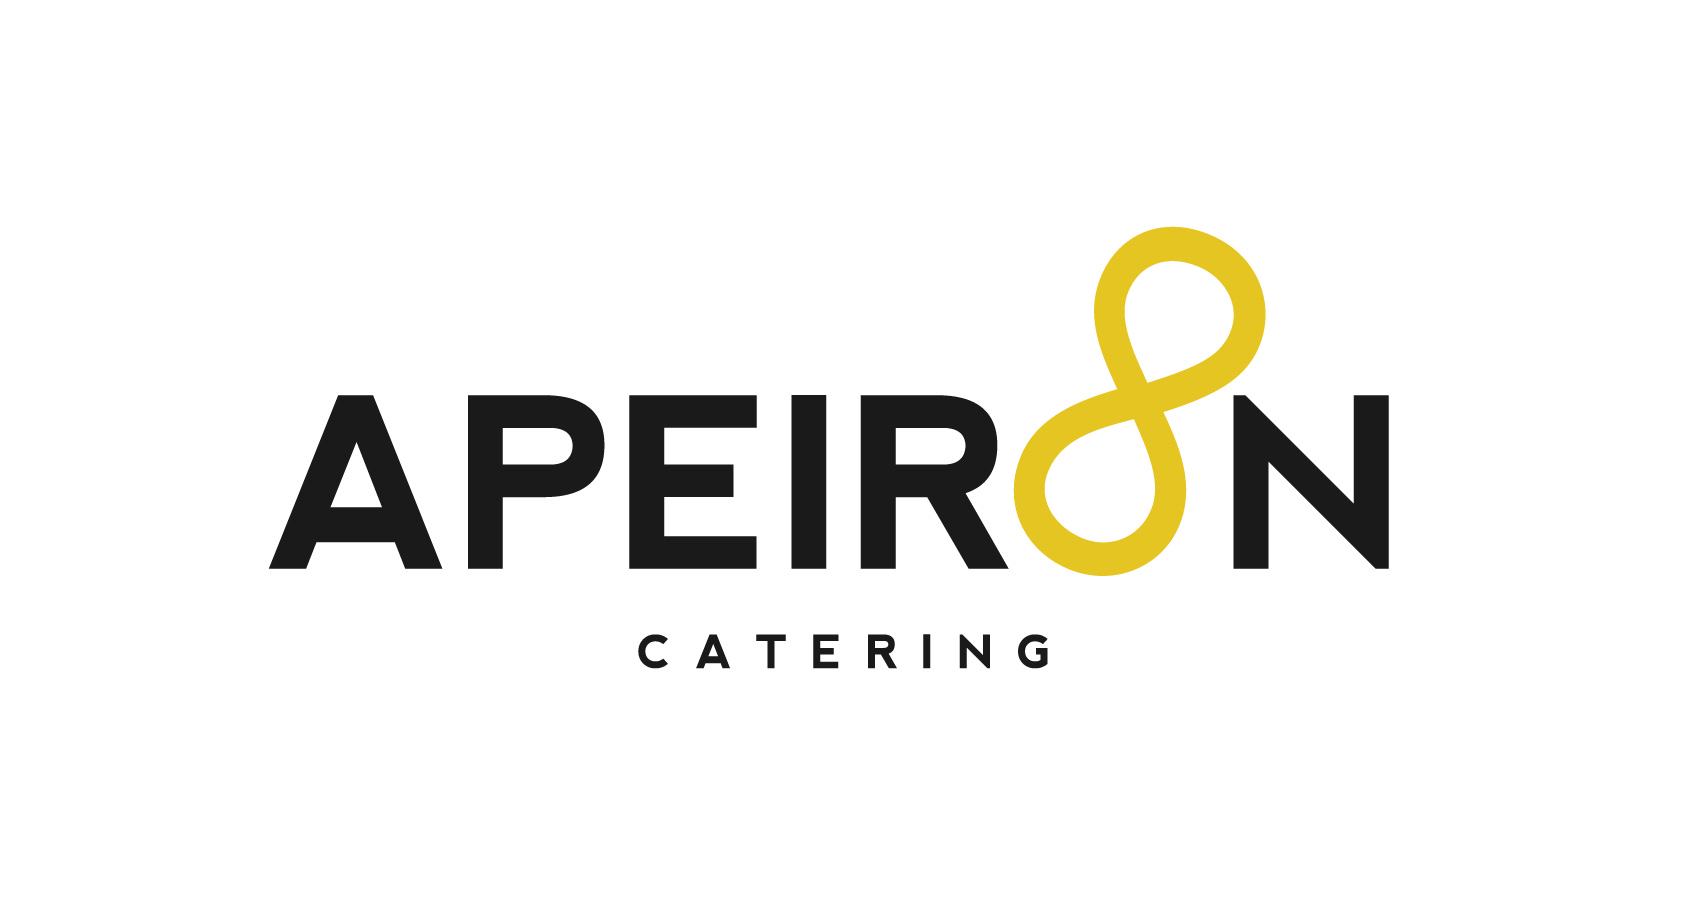 Apeiron Catering Ltd image.